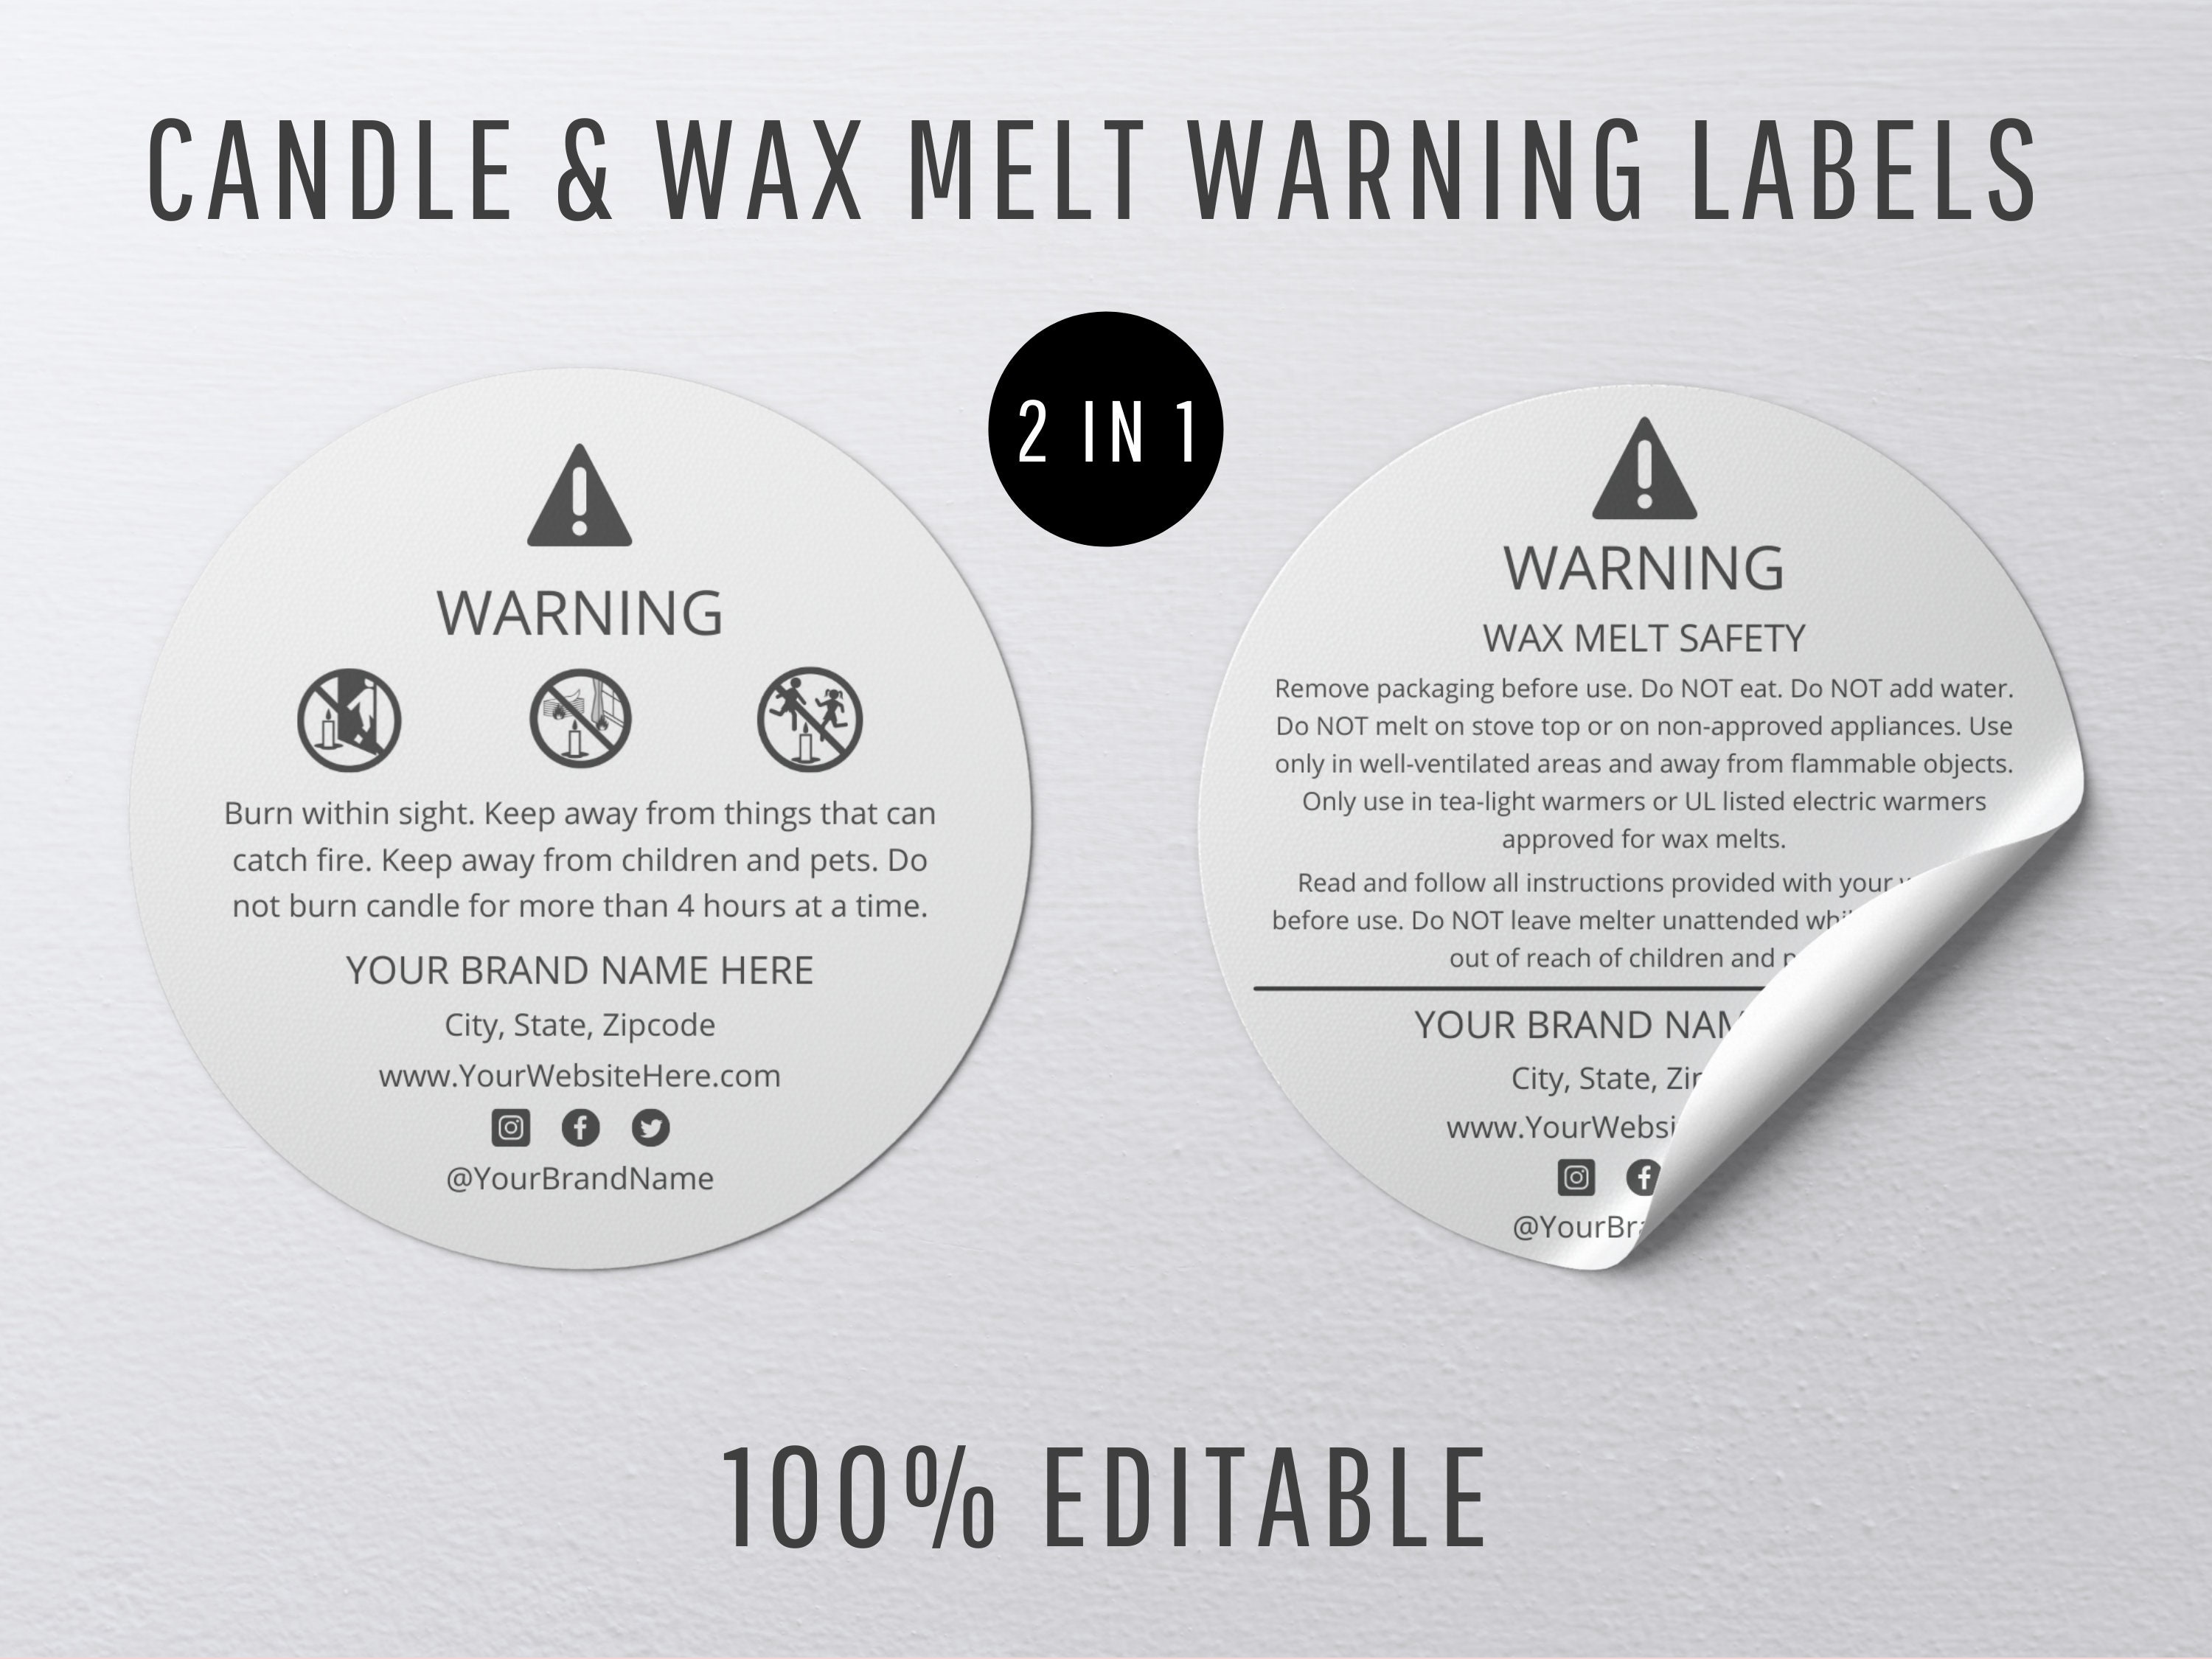 MILIVIXAY 600 Pieces Wax Melt Warning Labels Candle Macao